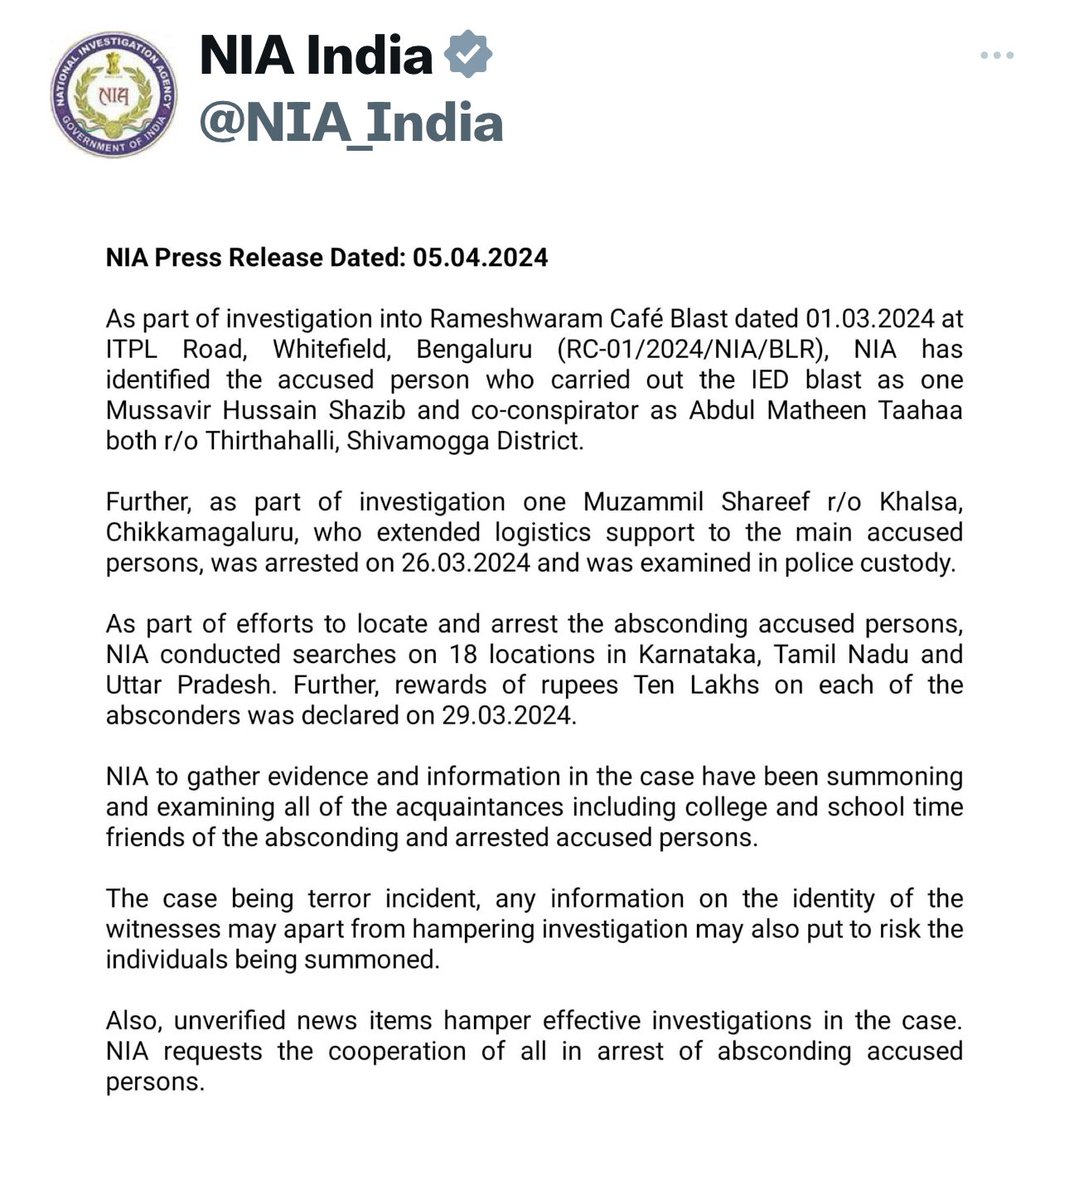 Sai Prasad is taken by NIA. As witness in the blast Investigation. Anyone twisting the facts and spreading fake news will face criminal case. BJP Will be registering case against at belur Gopalakrishna who misled everyone. @MalavikaBJP @CTRavi_BJP @Vishwasshettre